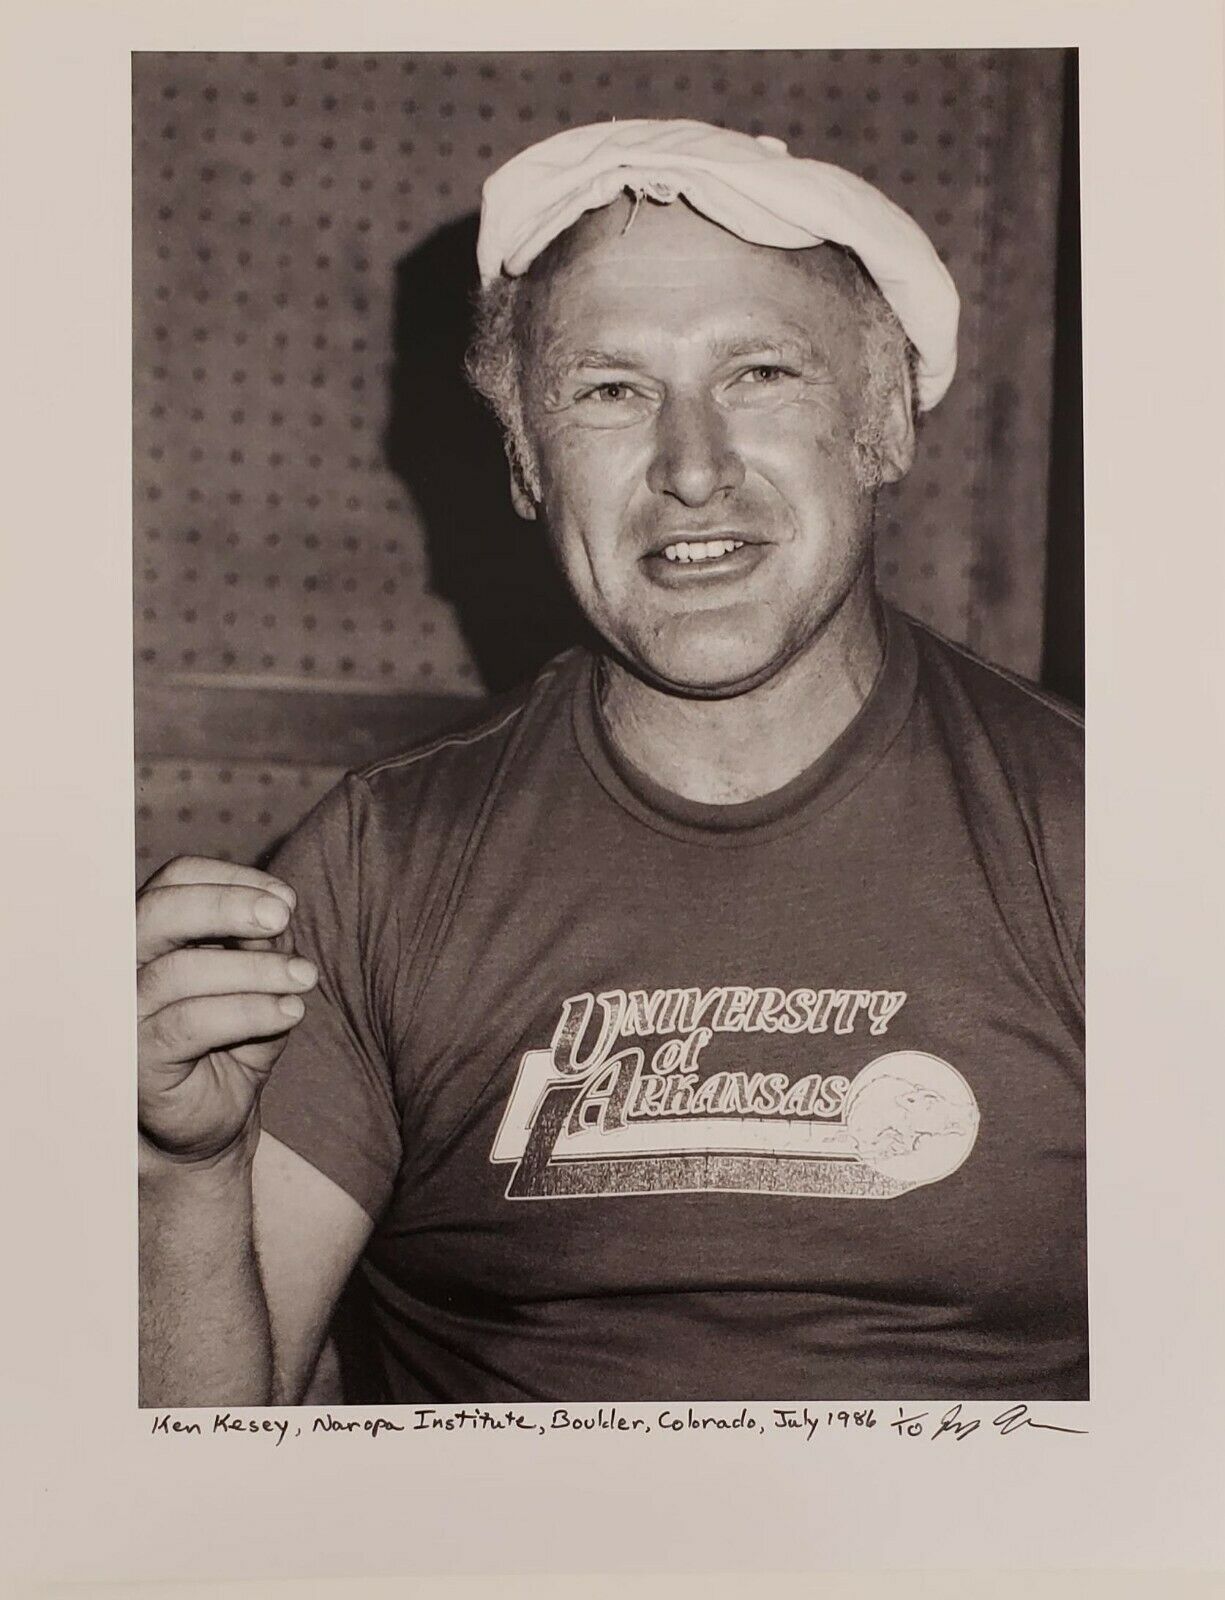 1348357 Ken Kesey at Naropa Institute in Boulder, Colorado. July 1974. Jerry Aronson.